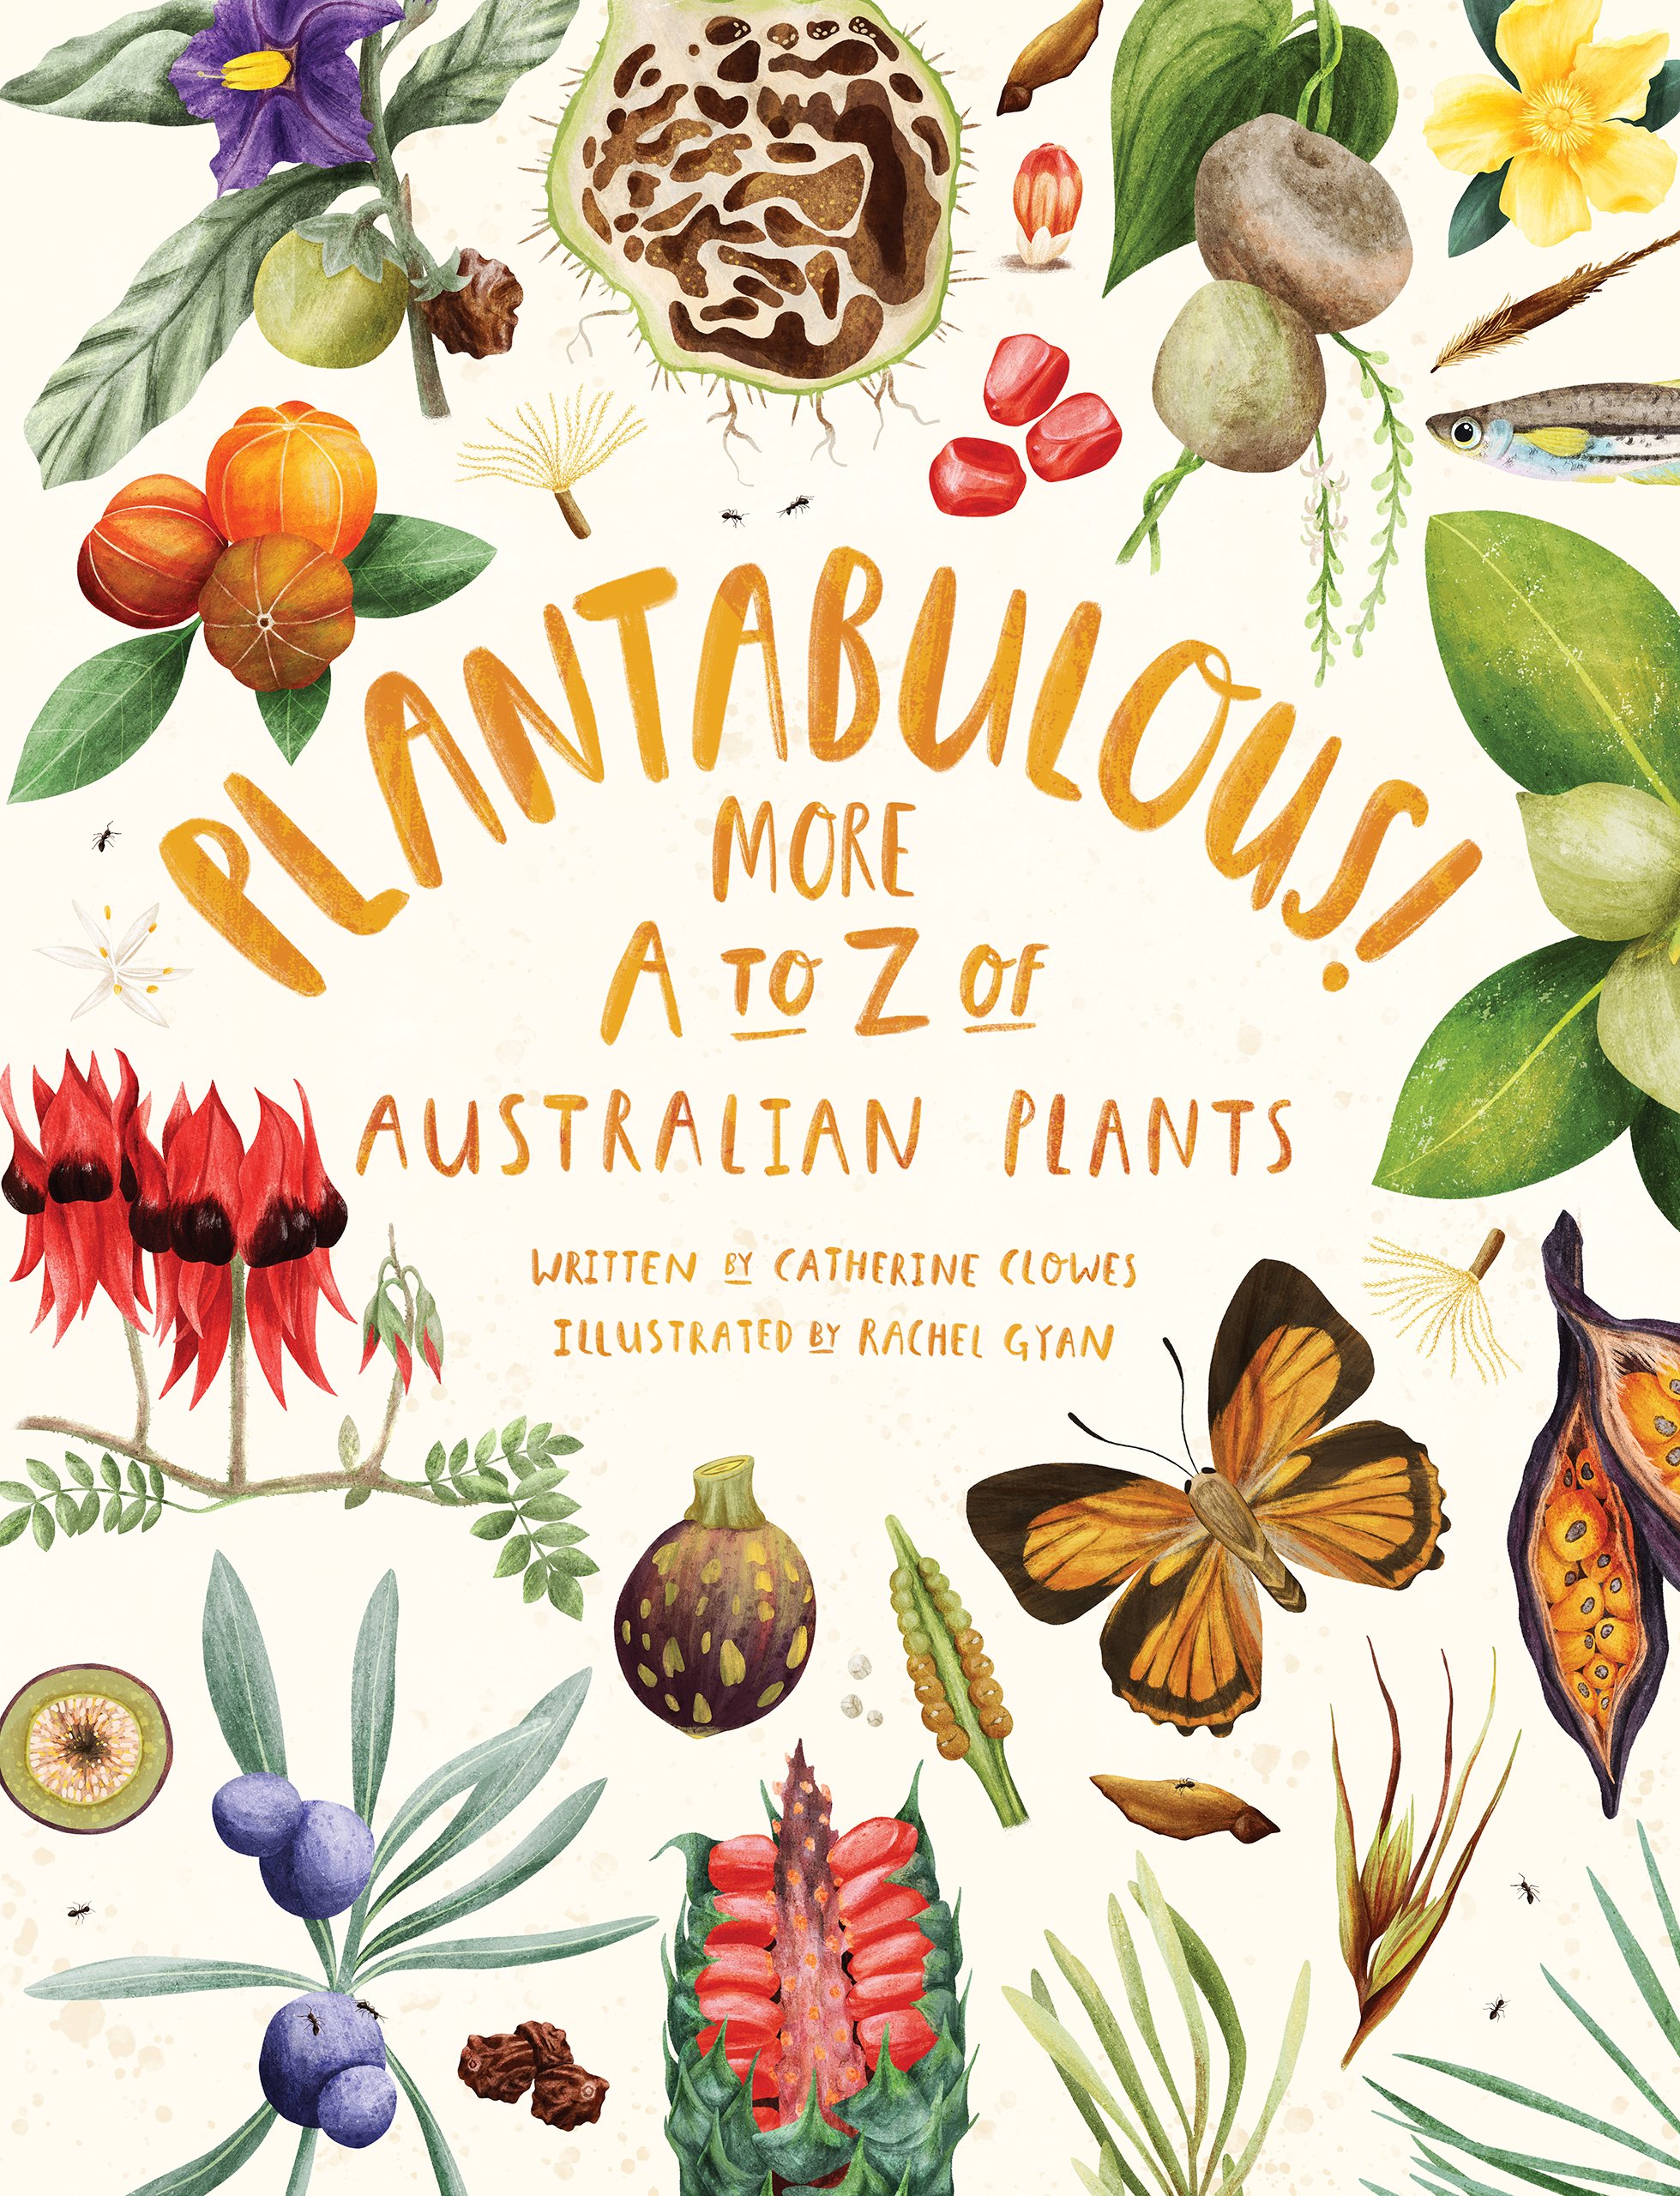 Plantabulous! by Catherine Clowes and Rachel Gyan